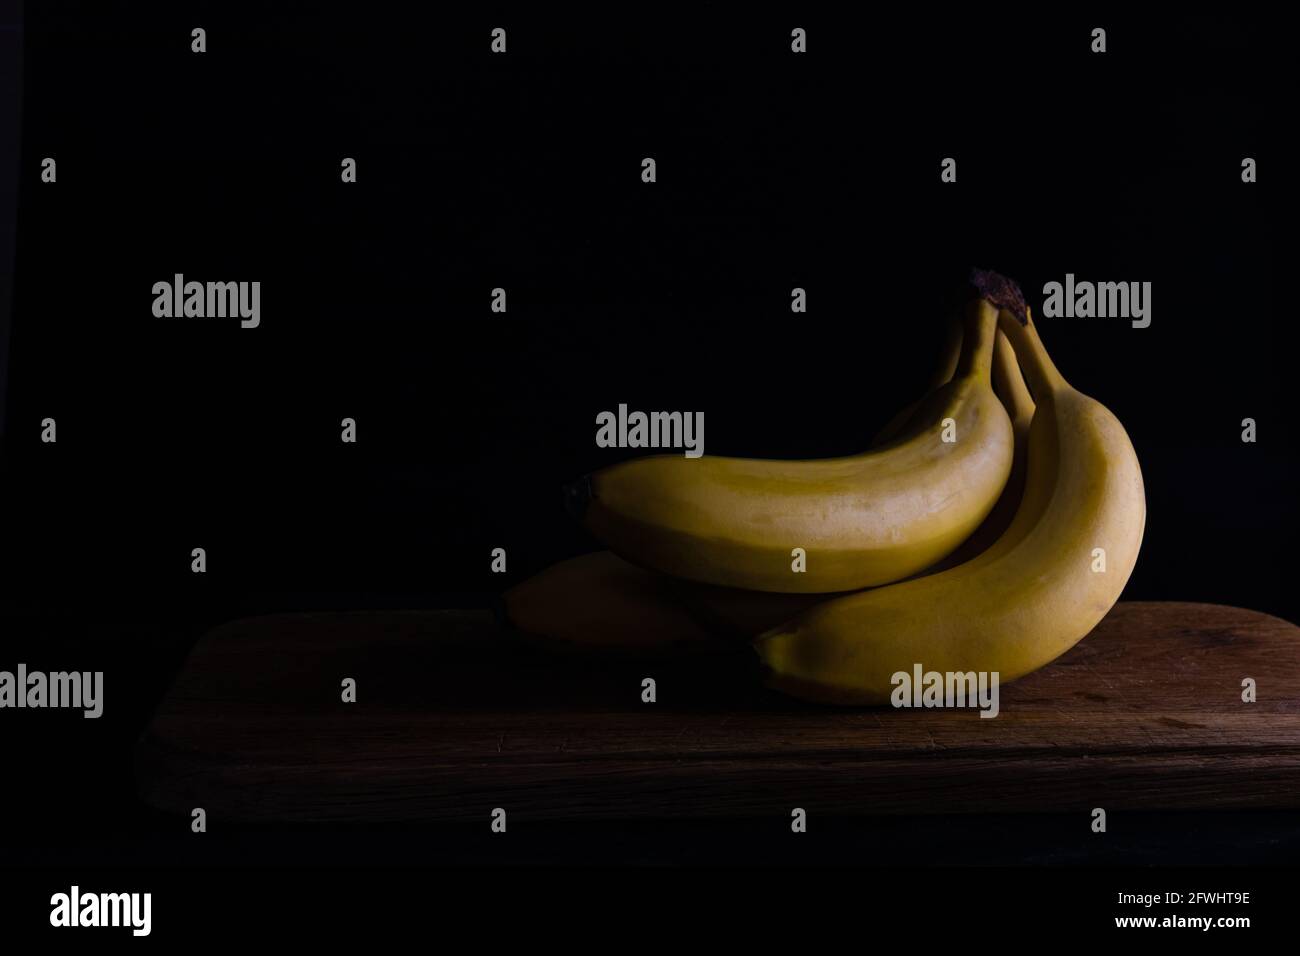 several bananas on a wooden board on a dark background. Stock Photo